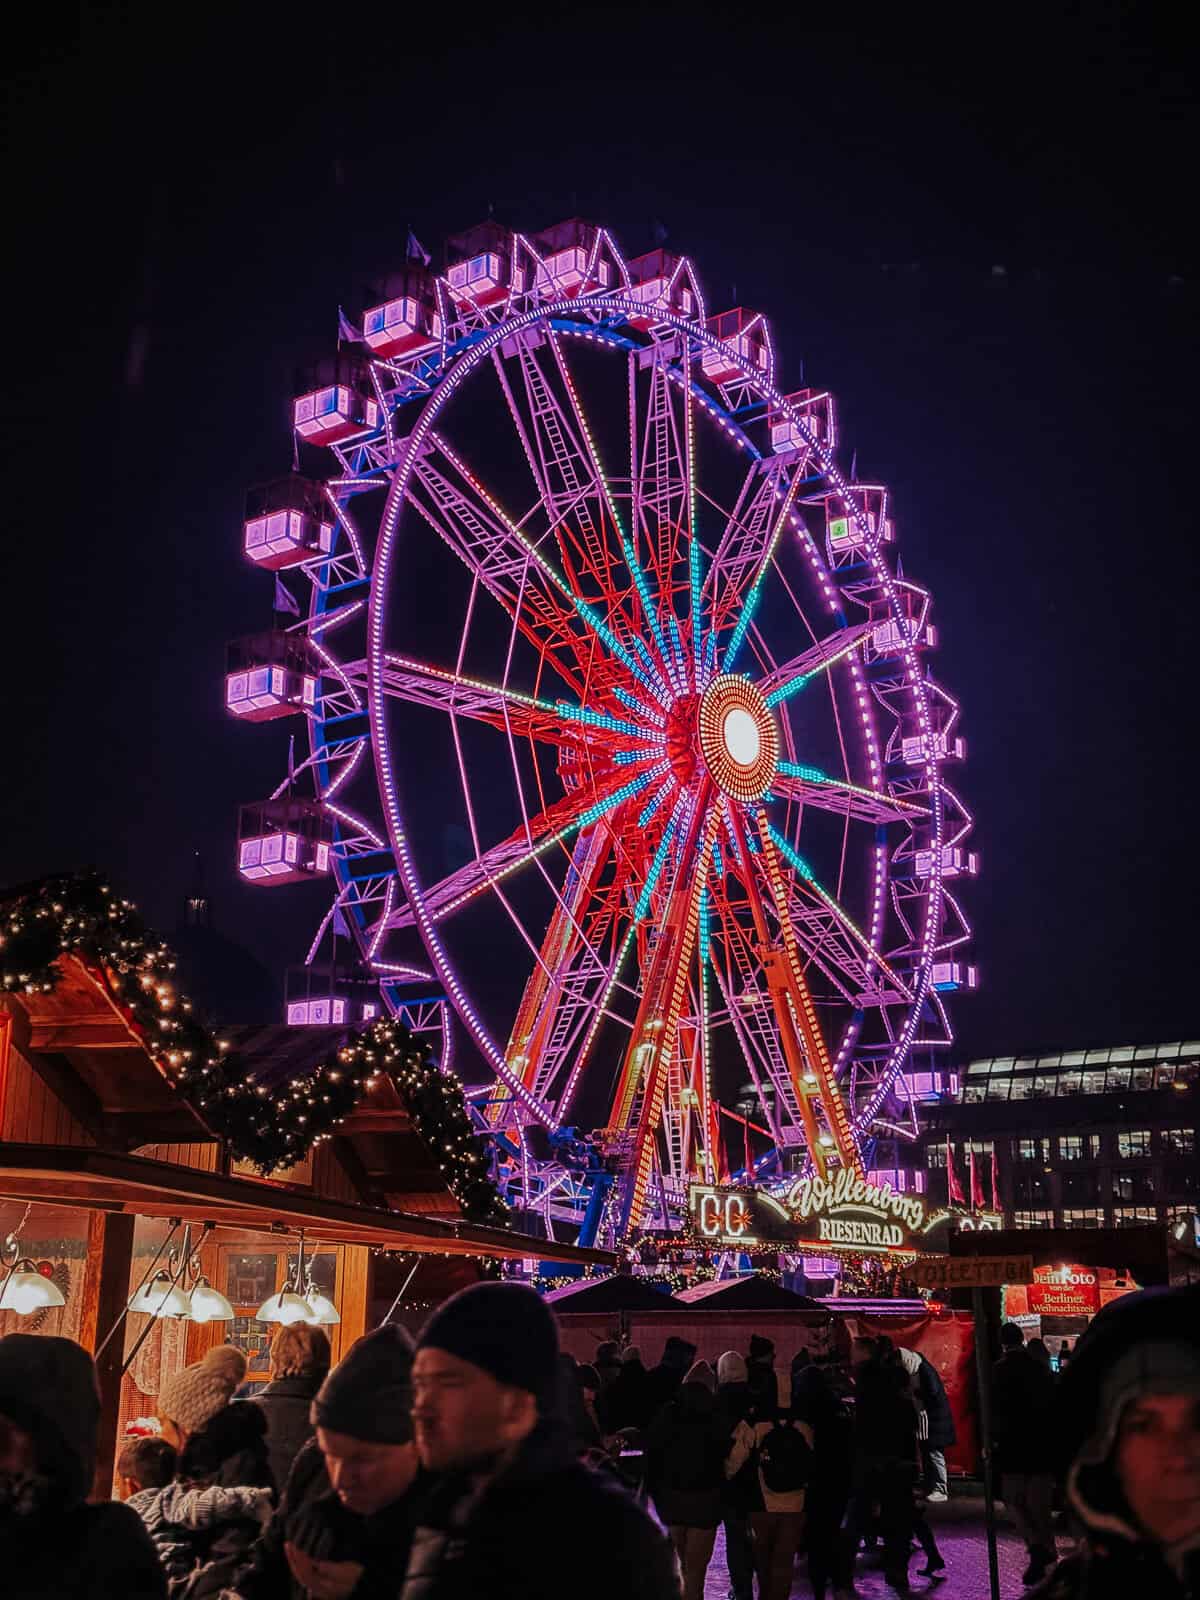 A vibrant and colorful Ferris wheel illuminated against the night sky at a bustling Christmas market. The wheel is surrounded by festive decorations and crowds of people, enhancing the festive atmosphere